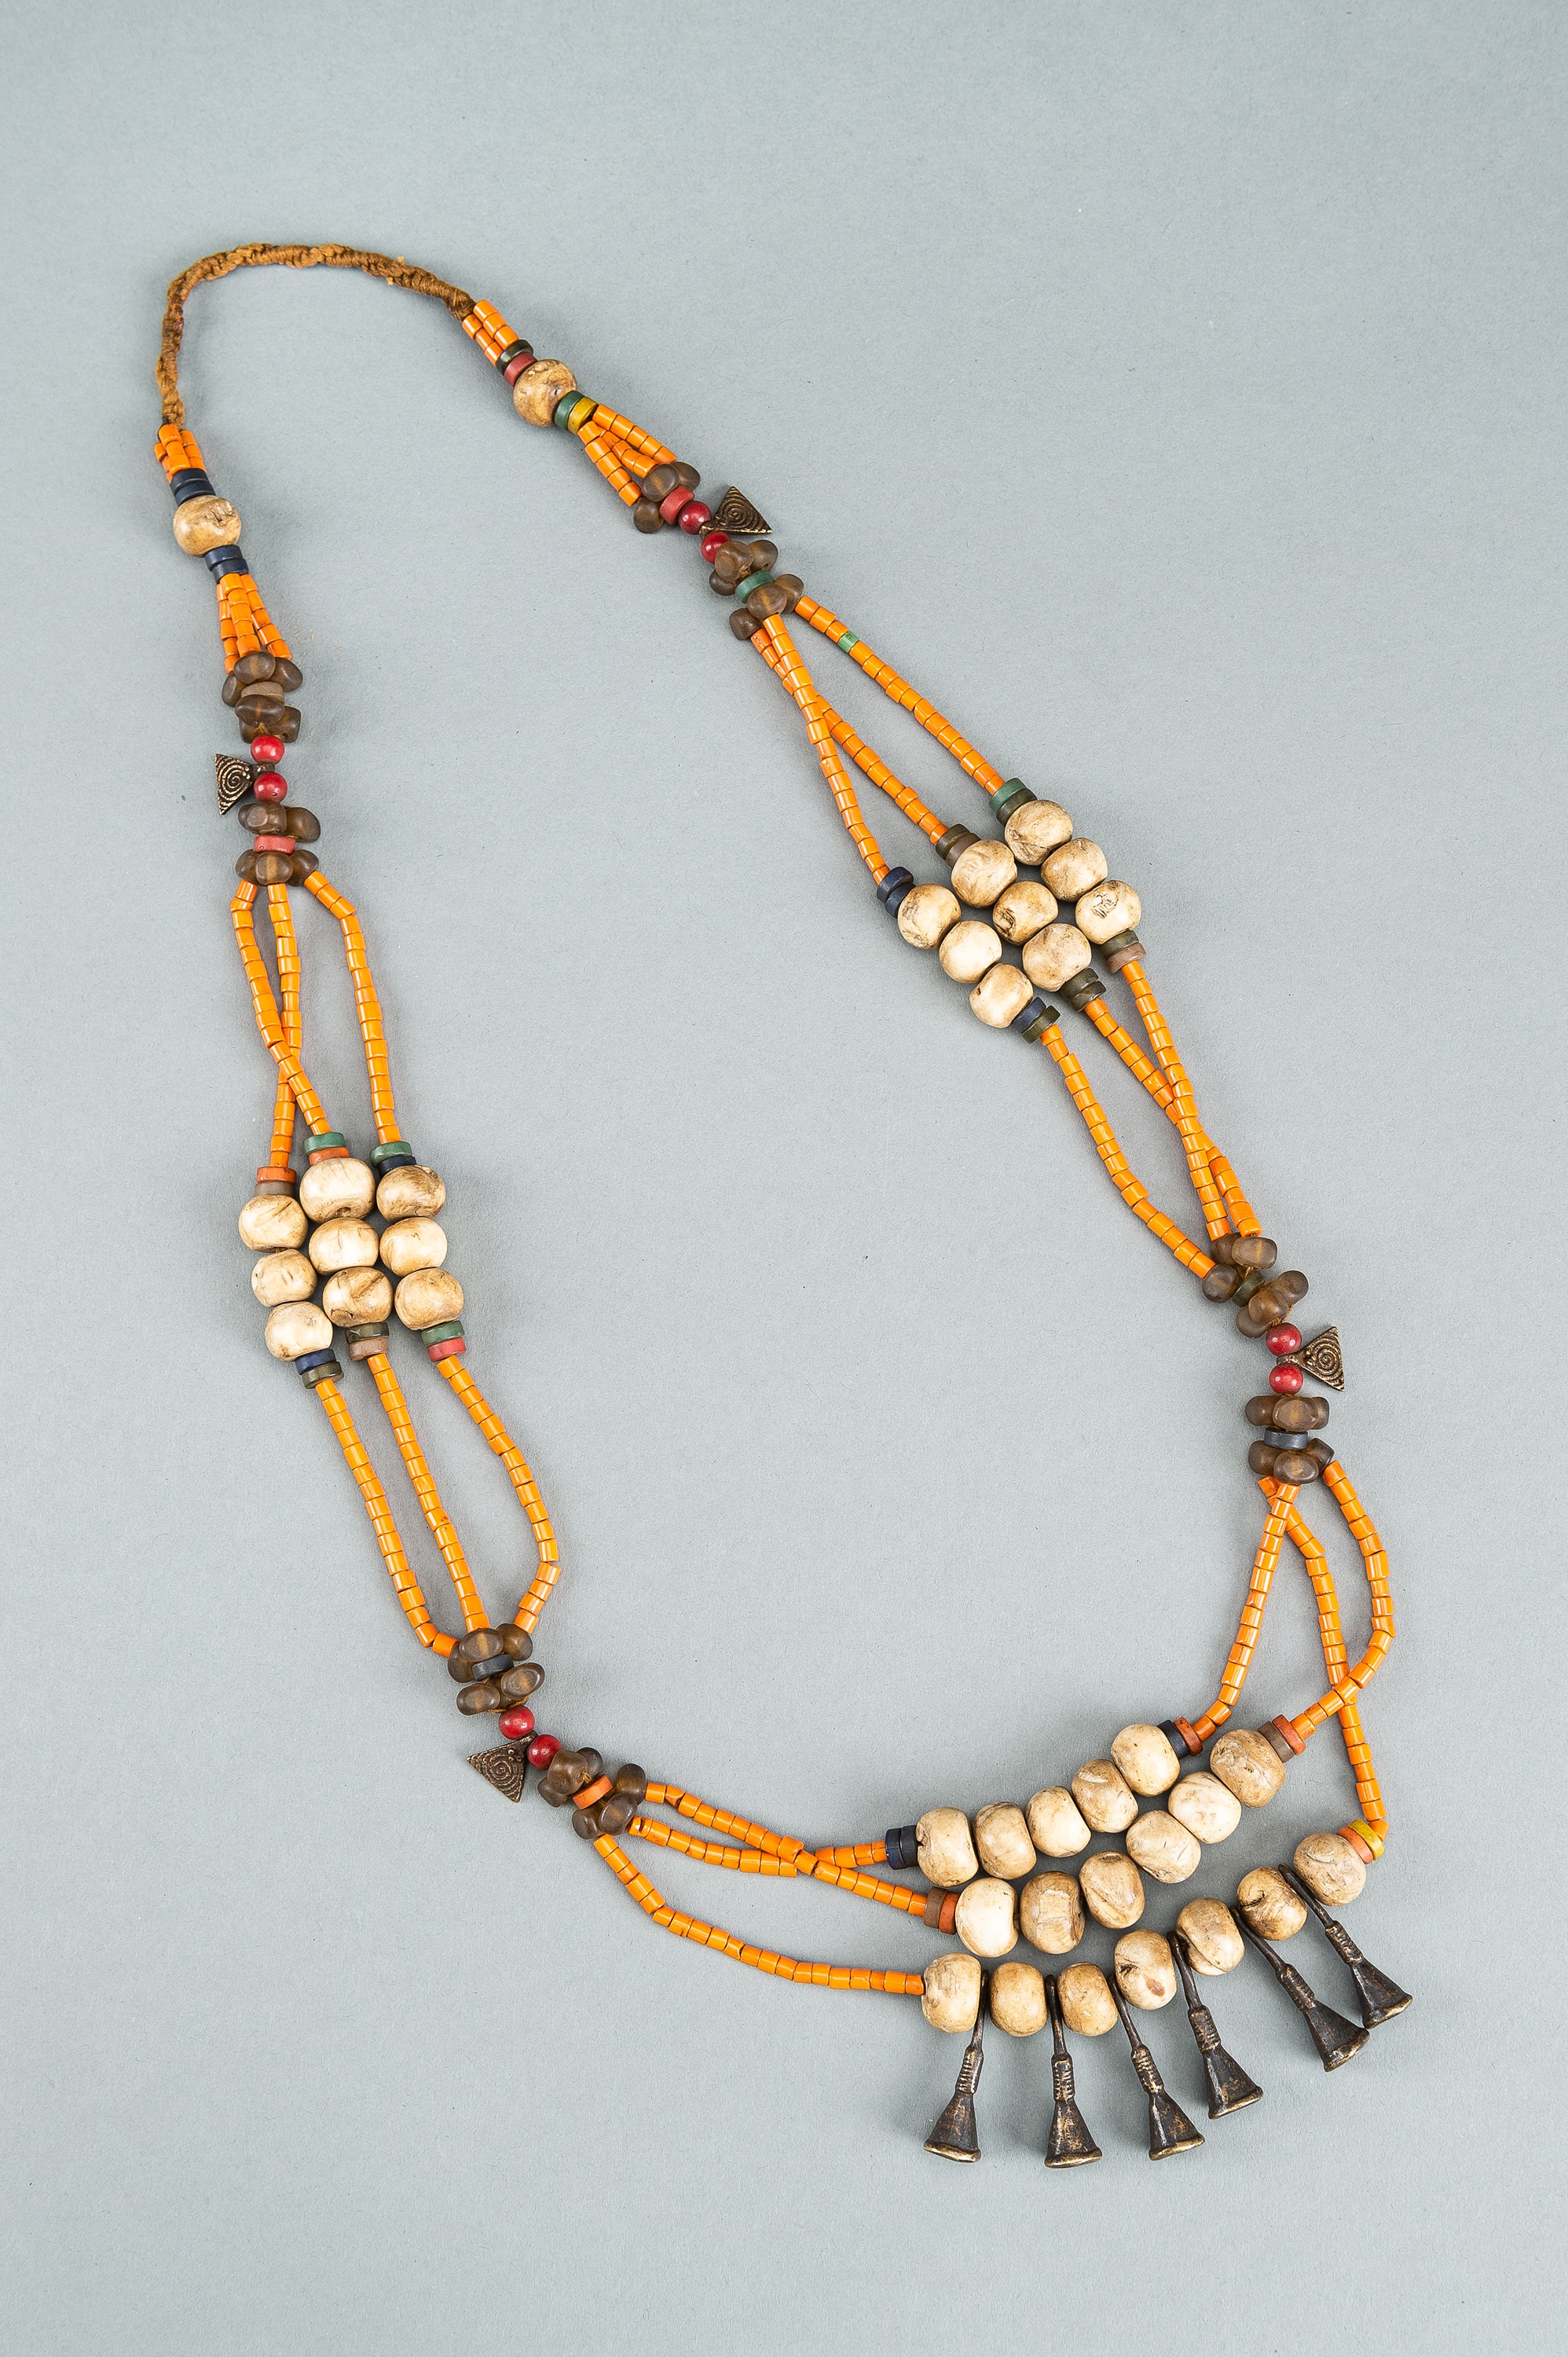 A NAGALAND MULTI-COLORED GLASS, BRASS AND SHELL NECKLACE, c. 1900s - Image 8 of 10